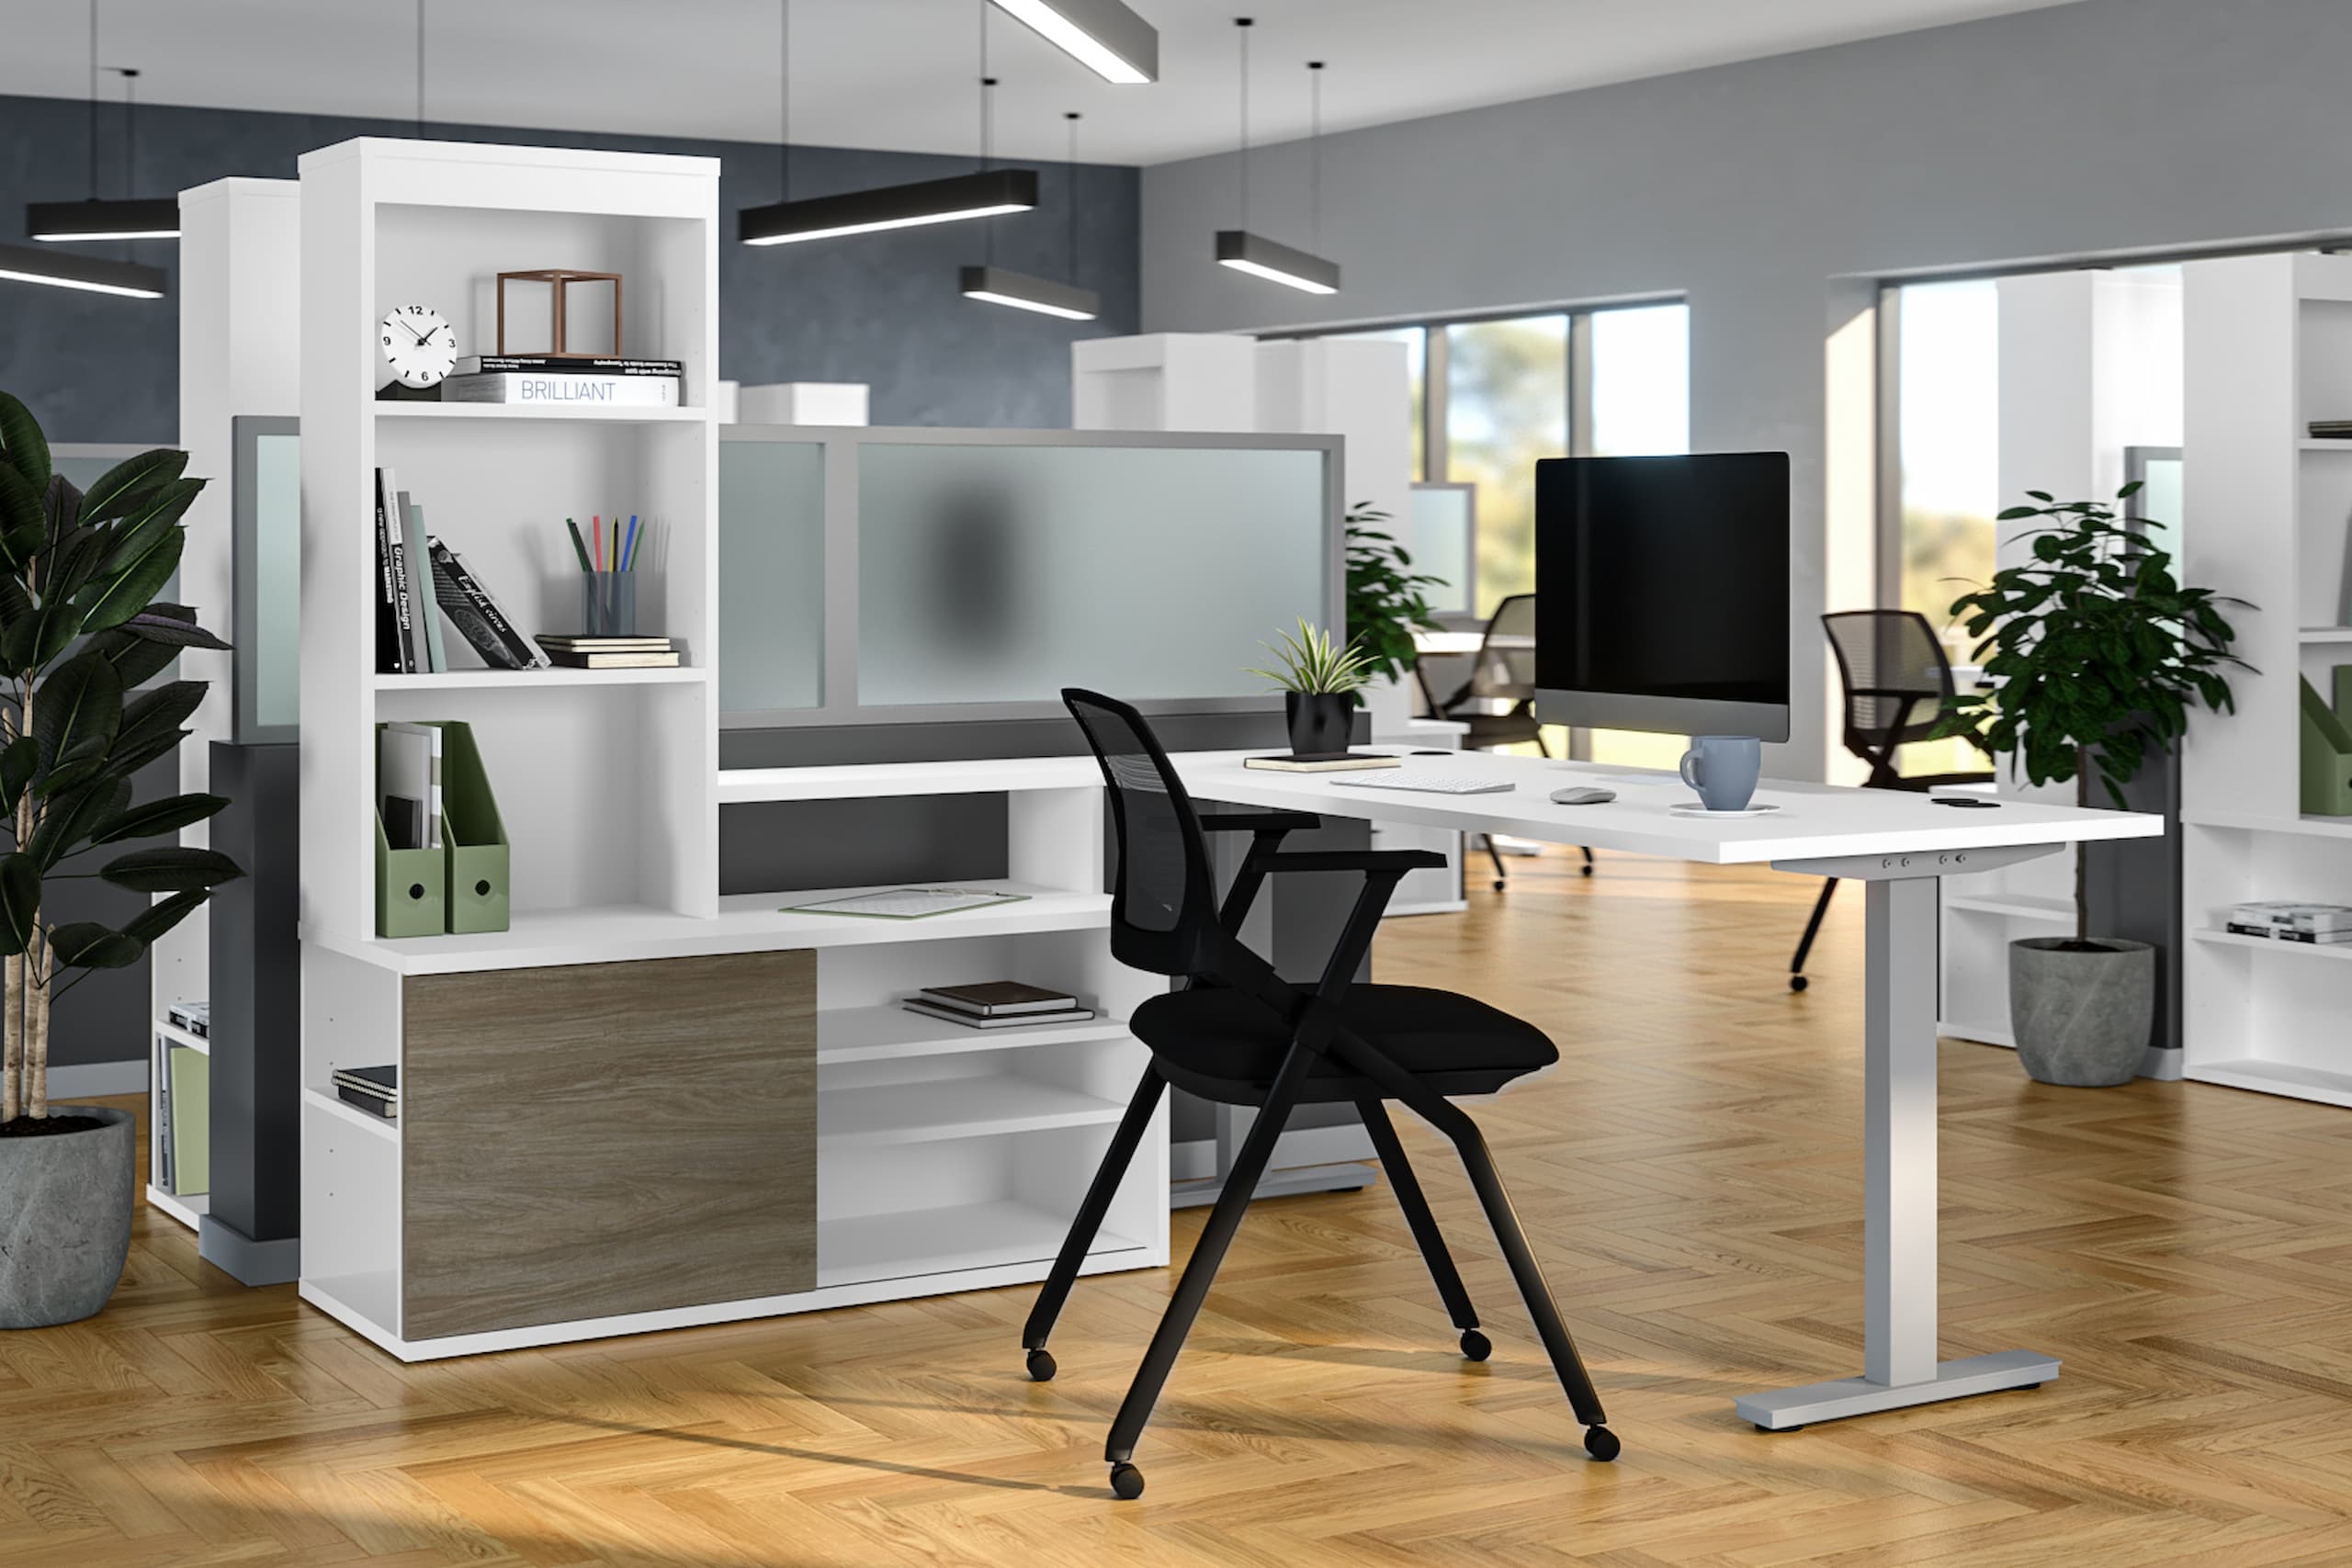 Functional and stylish workstation in a commercial workspace